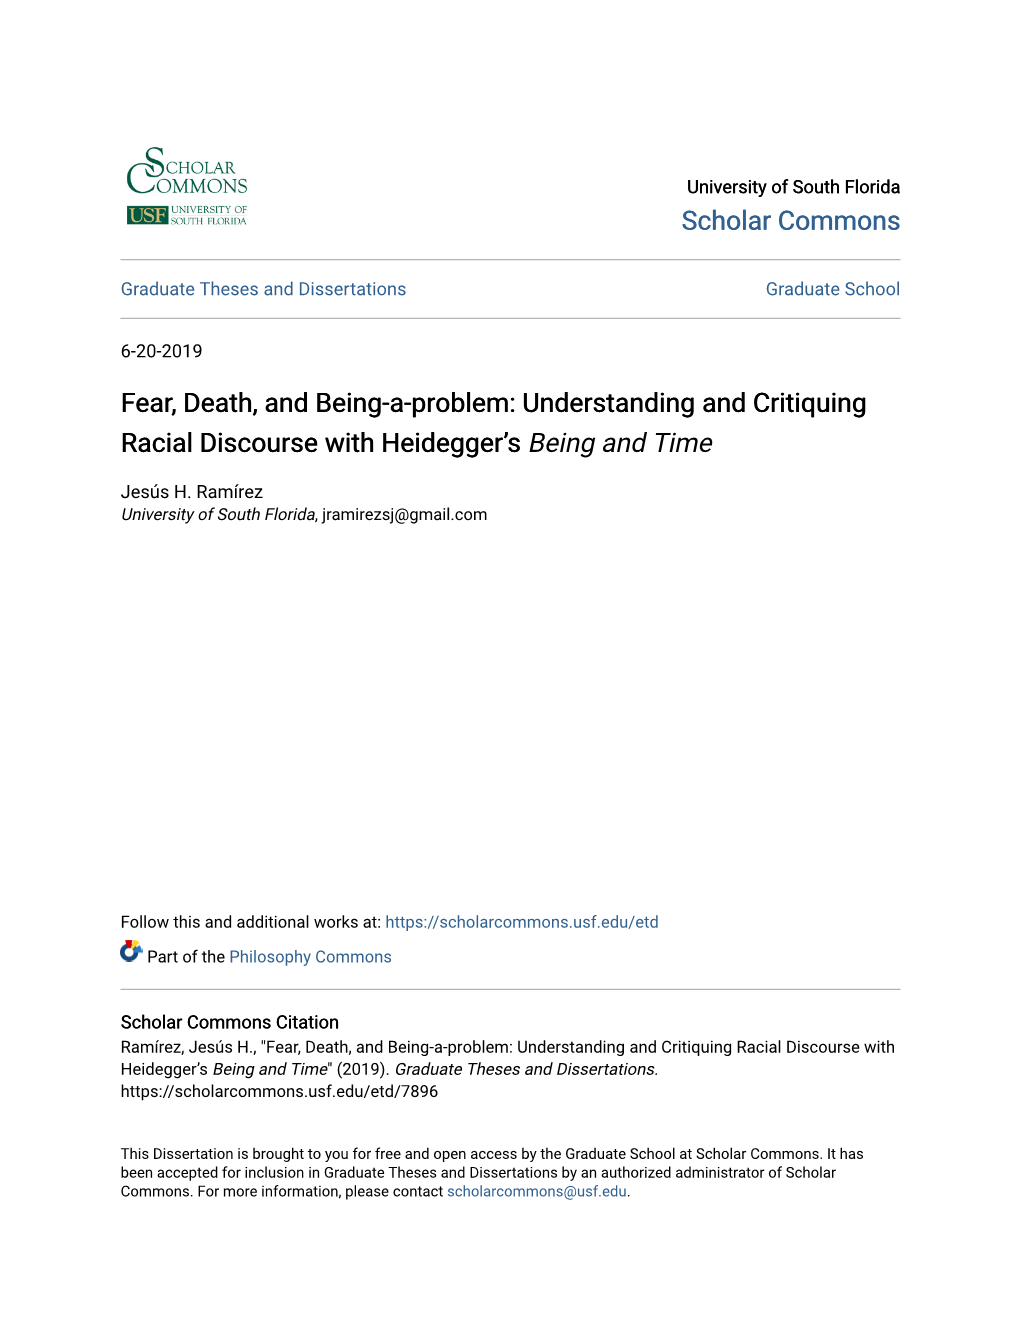 Fear, Death, and Being-A-Problem: Understanding and Critiquing Racial Discourse with Heidegger's